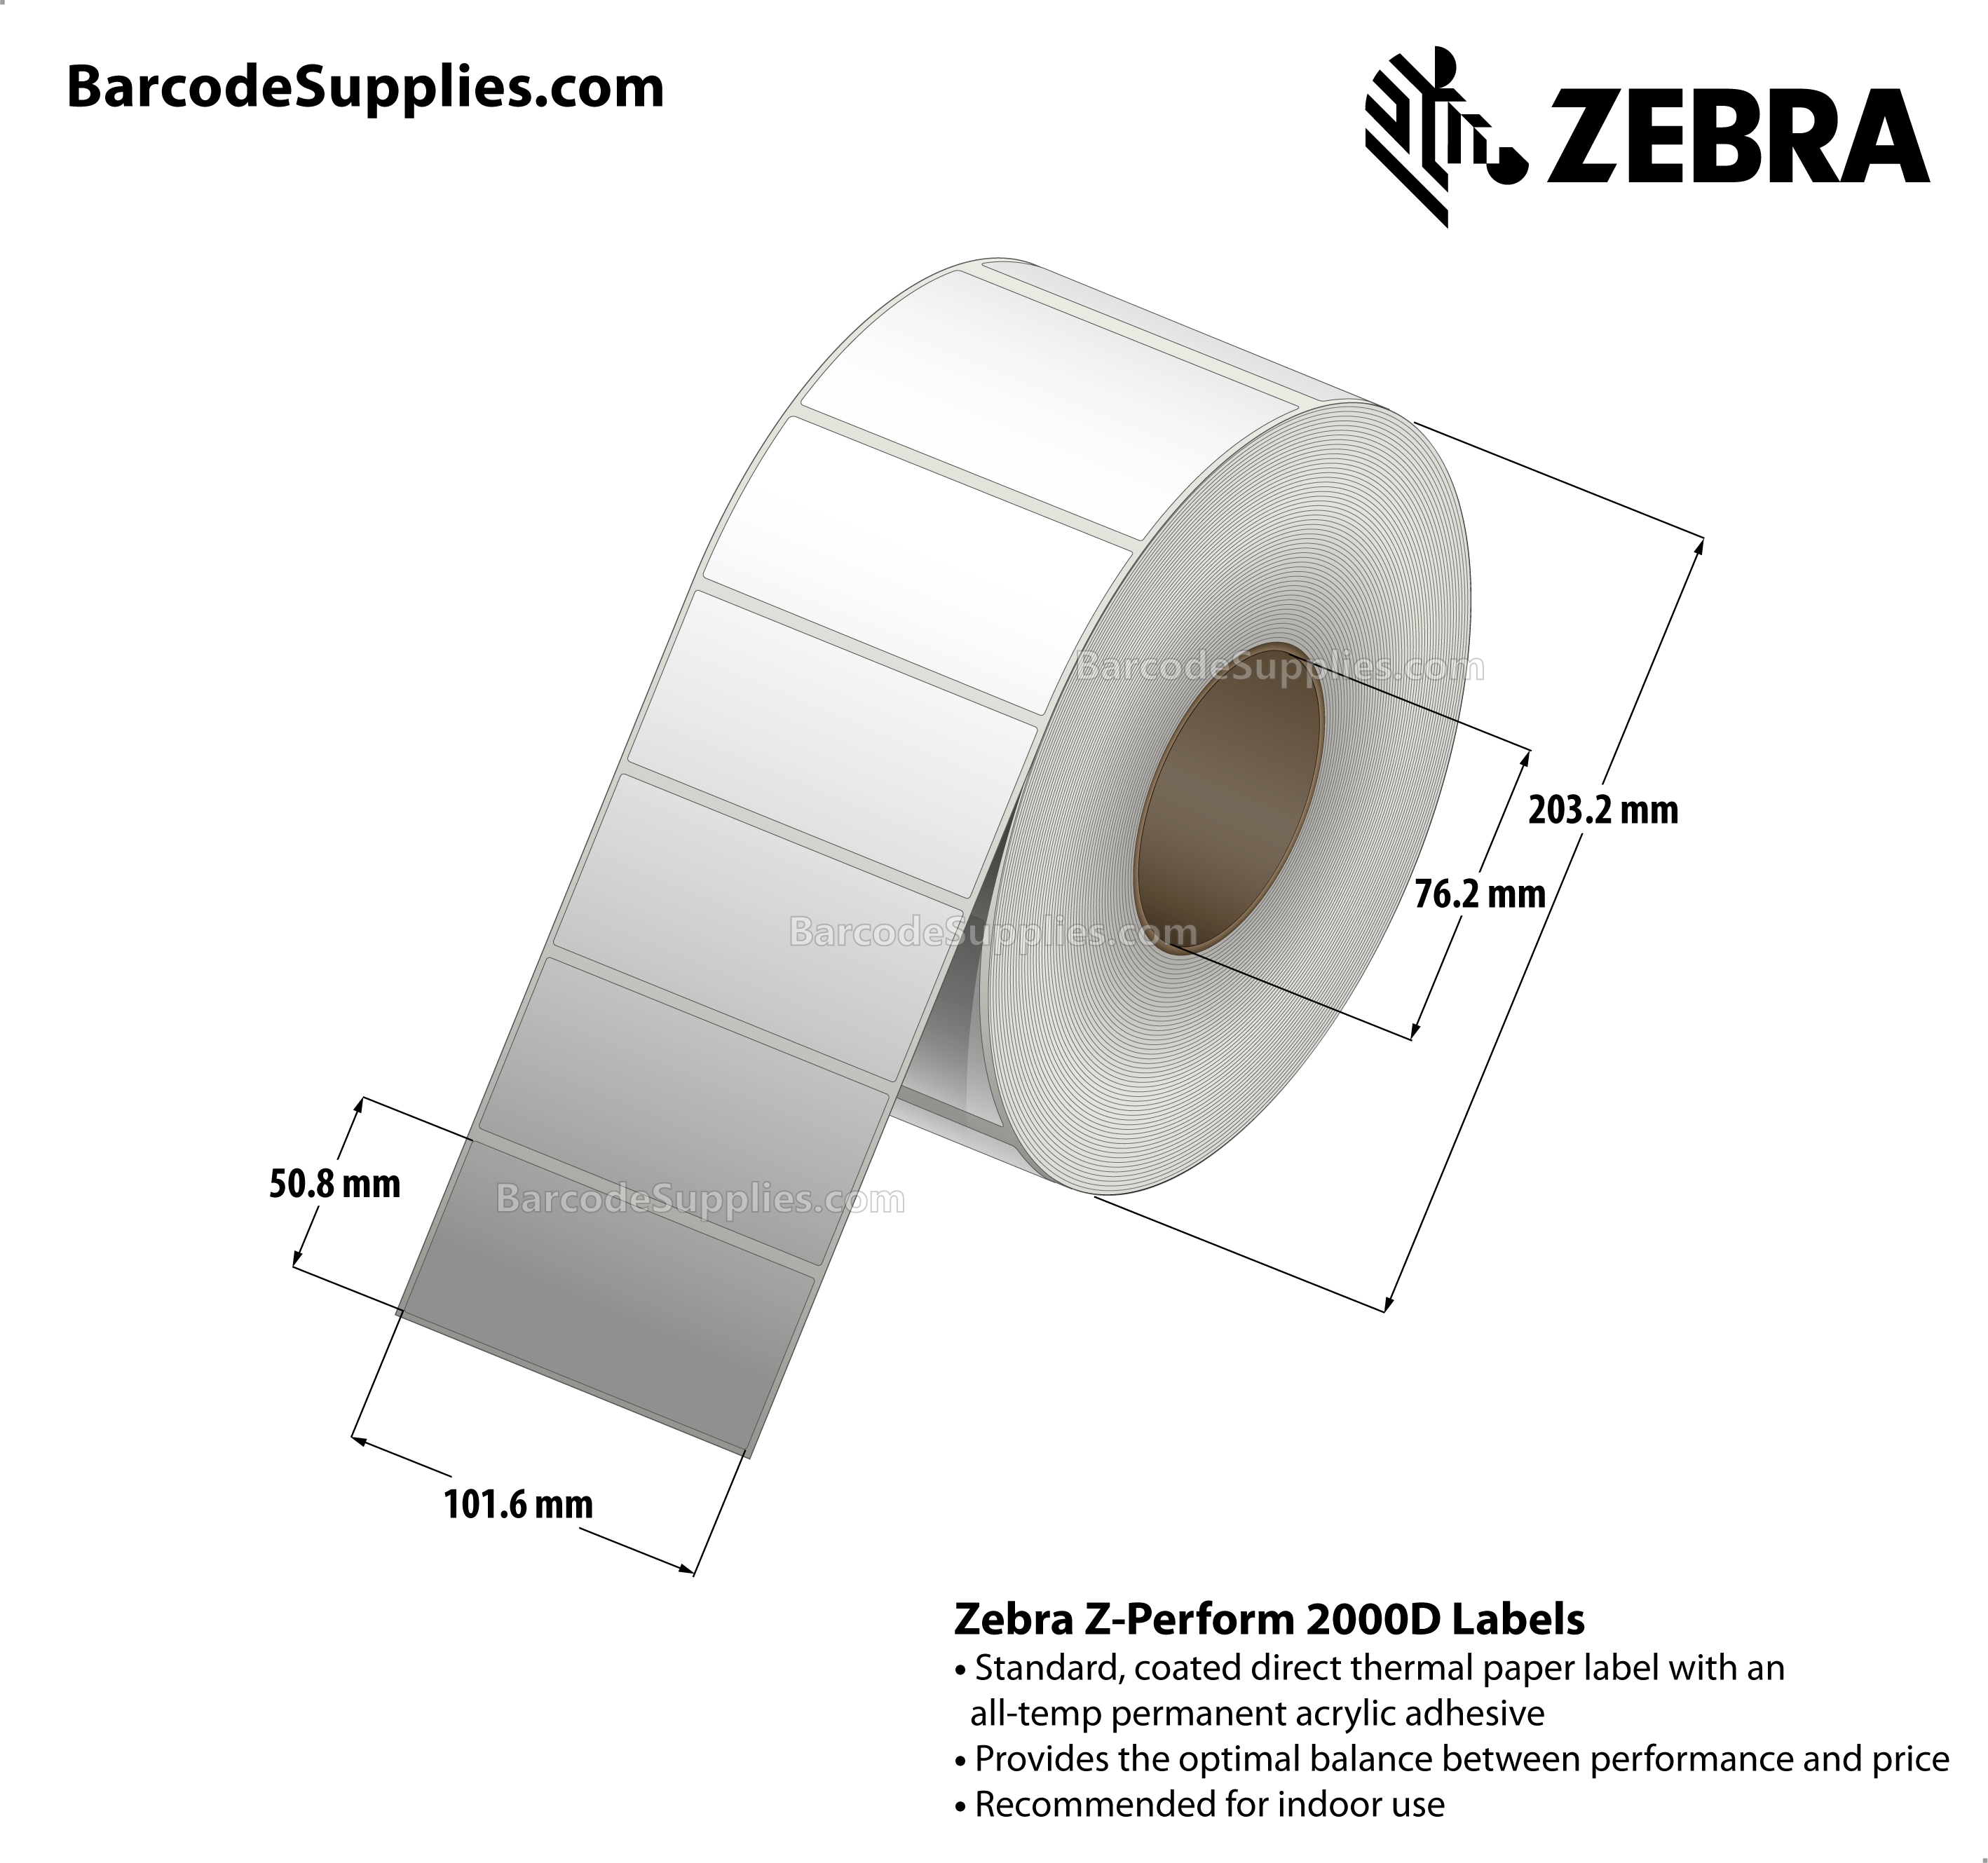 4 x 2 Direct Thermal White Z-Perform 2000D (No Perf) Labels With All-Temp Adhesive - Not Perforated - 2720 Labels Per Roll - Carton Of 4 Rolls - 10880 Labels Total - MPN: 10012164